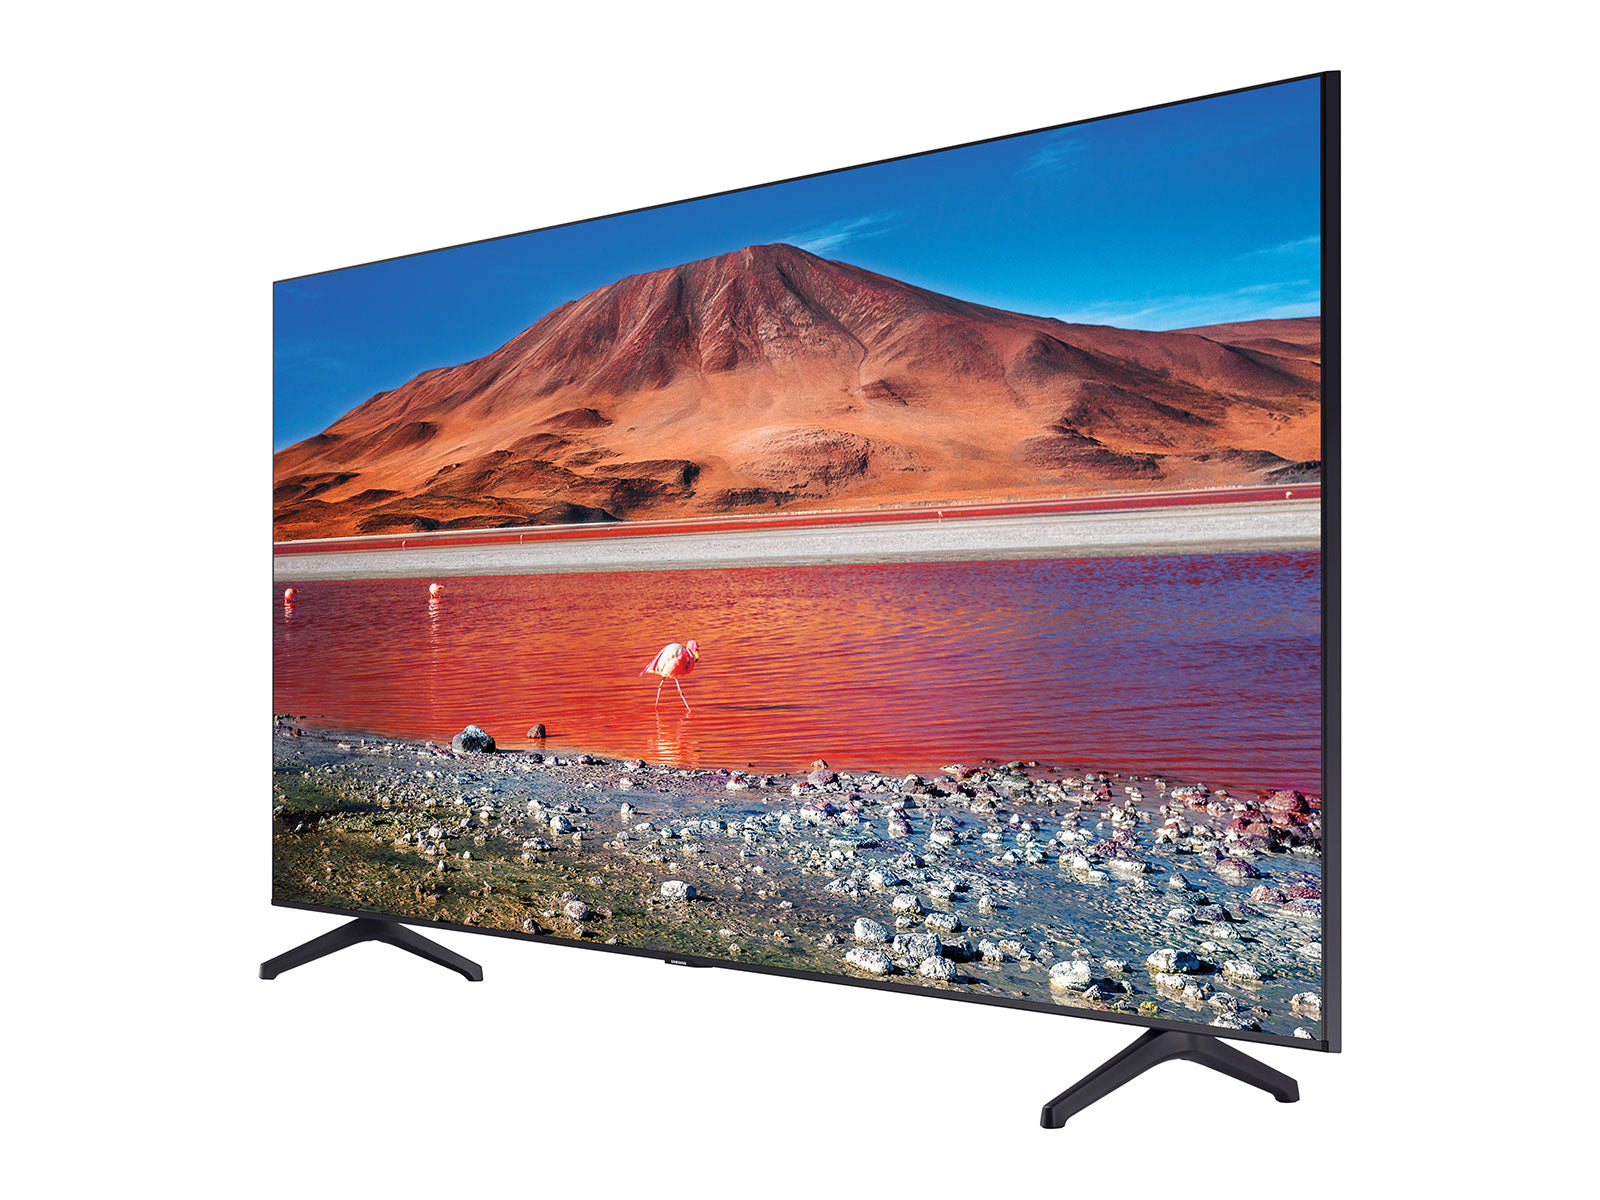 Samsung 75" Class TU700D 4K Crystal UHD HDR Smart TV(Refurbished) Tv's ONLY for delivery in San Diego and Tijuana